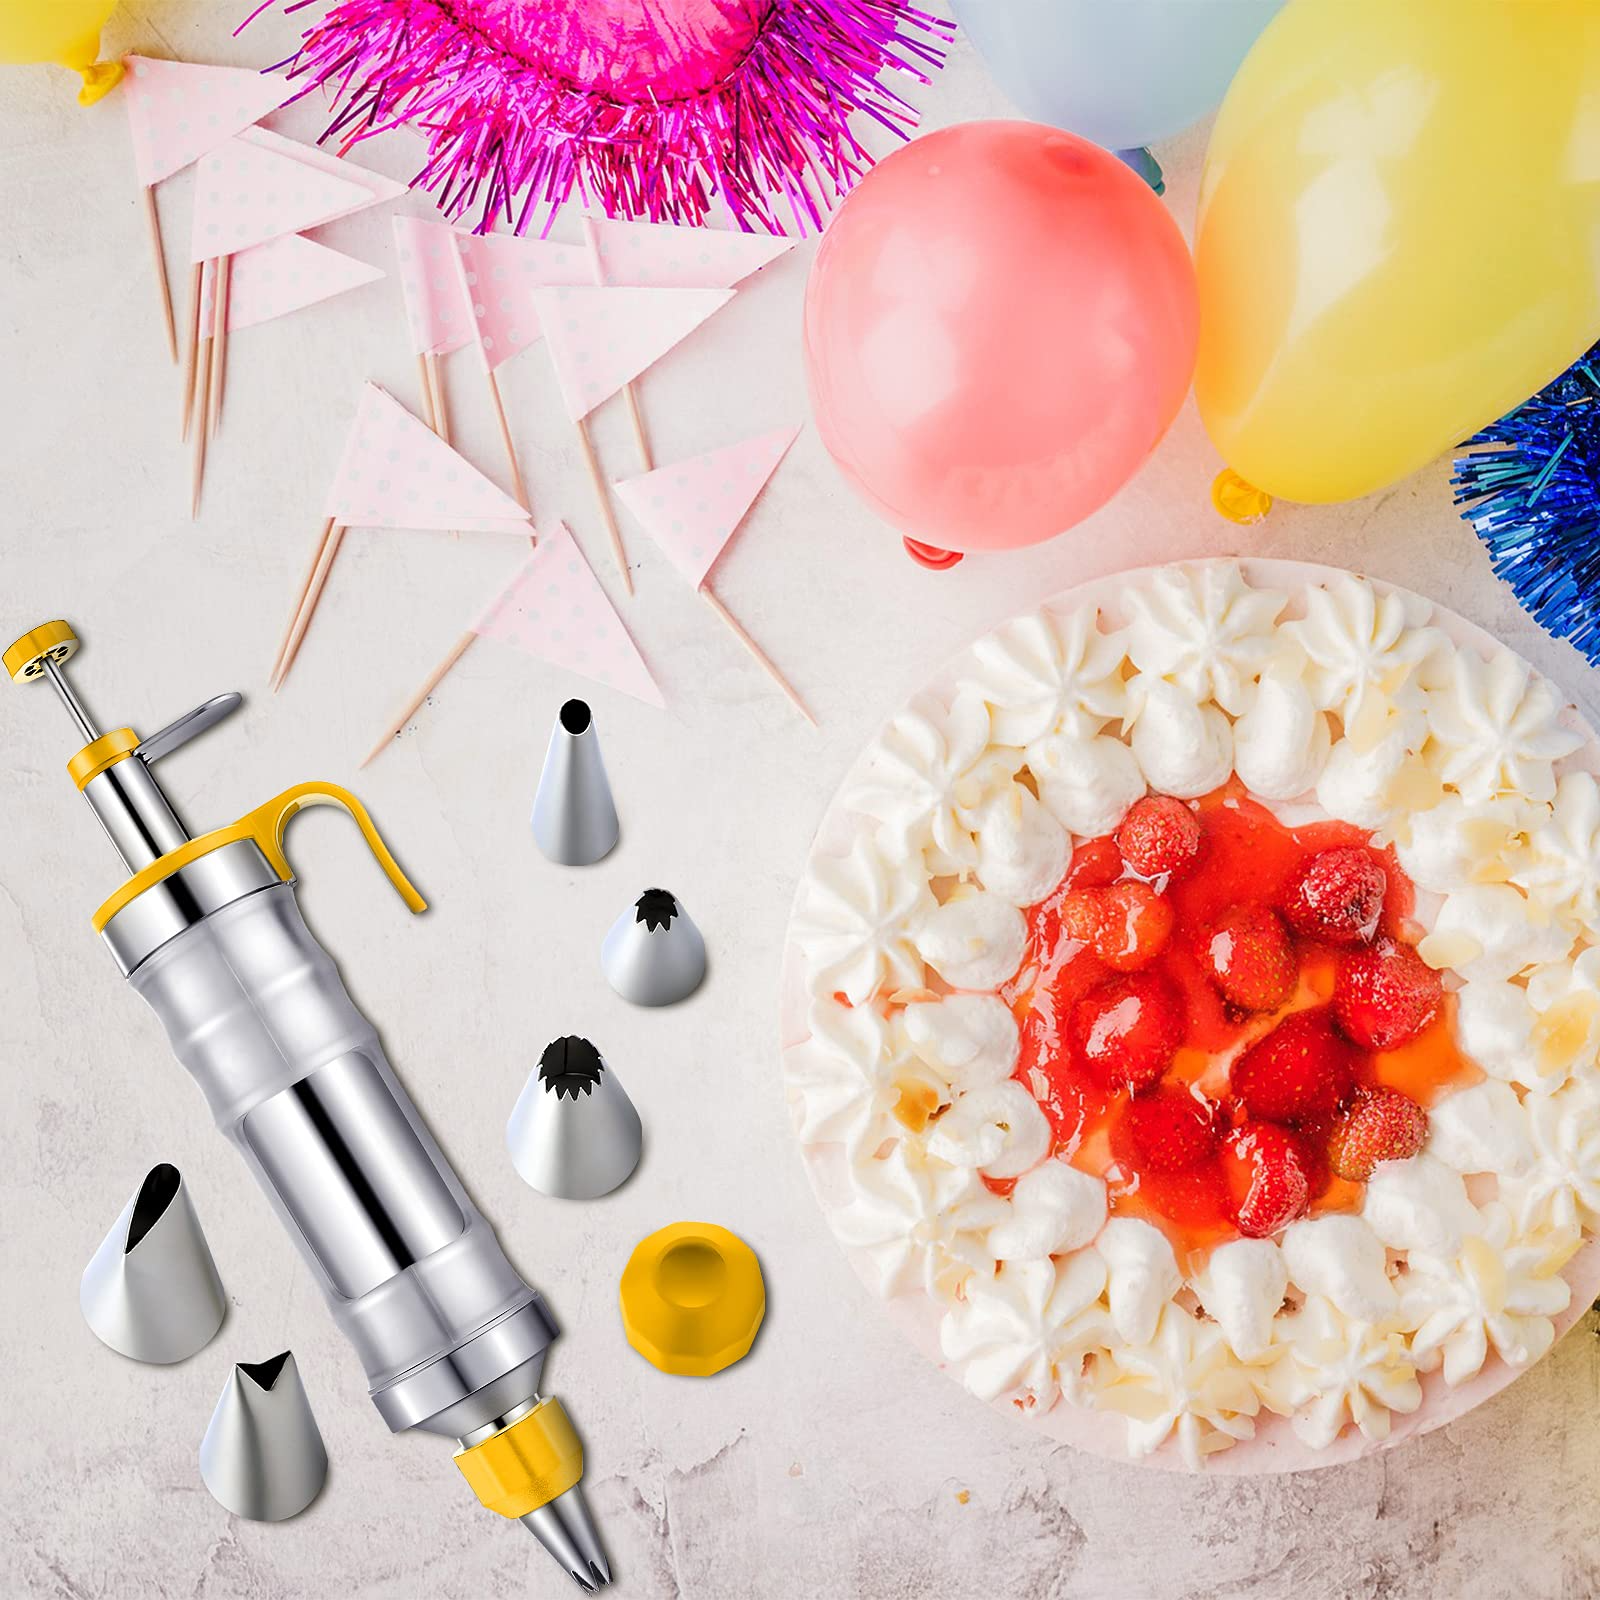 Cake Decorating Tools. Set for Decorating Desserts. Stock Photo - Image of  object, desserts: 207497858